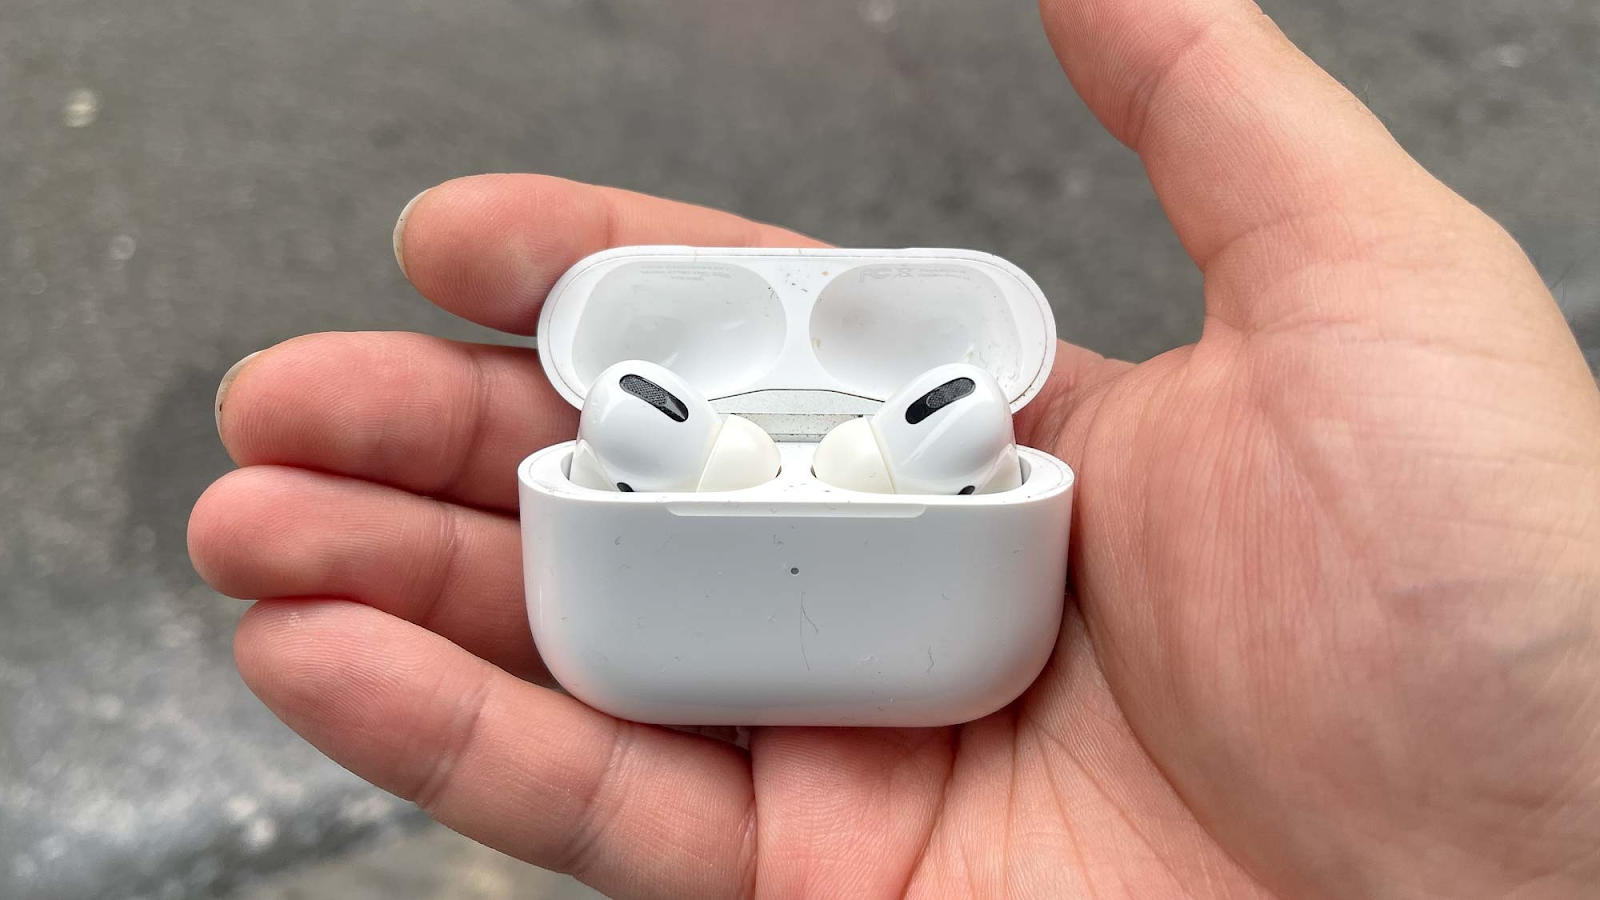 Replace Your Faulty AirPods incase your airpods light won't turn on